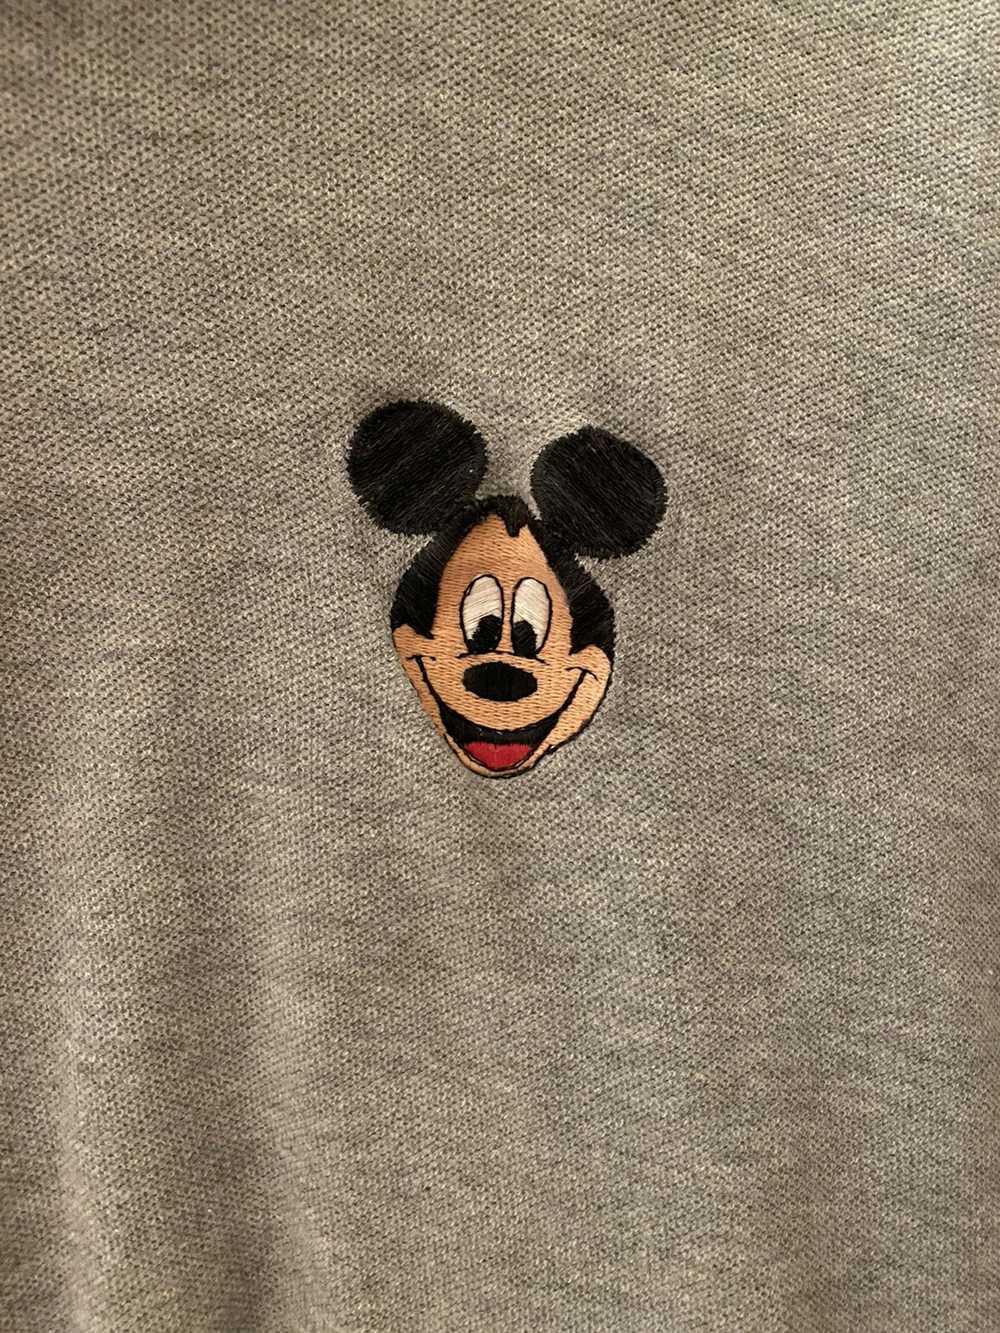 Mickey Unlimited × Vintage Mickey Unlimited Polo - image 2